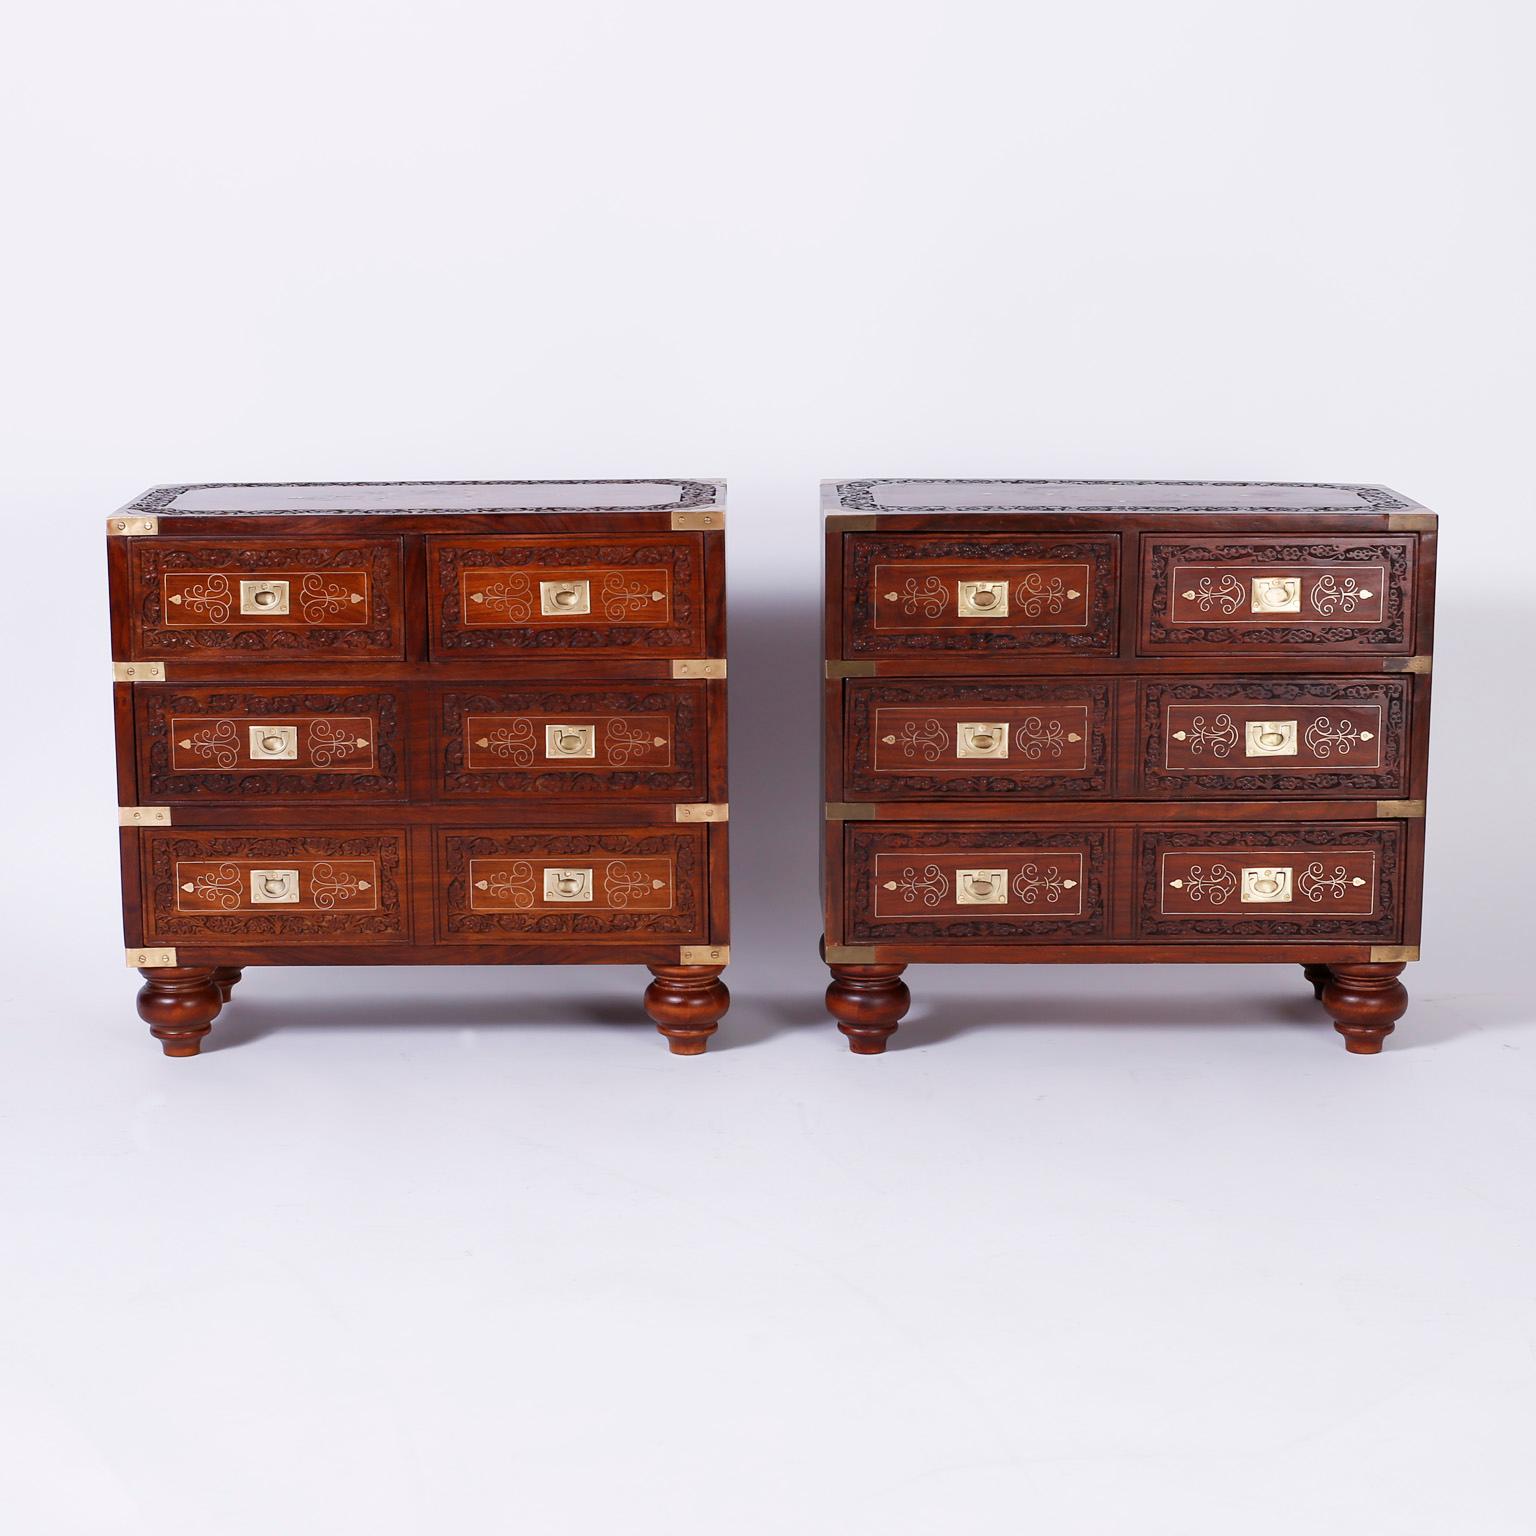 Inspired pair of Anglo-Indian mahogany stands or six-drawer chests with hand carved floral borders, symbolic brass string inlays on the top, front and sides, campaign style hardware, and classic turned feet.